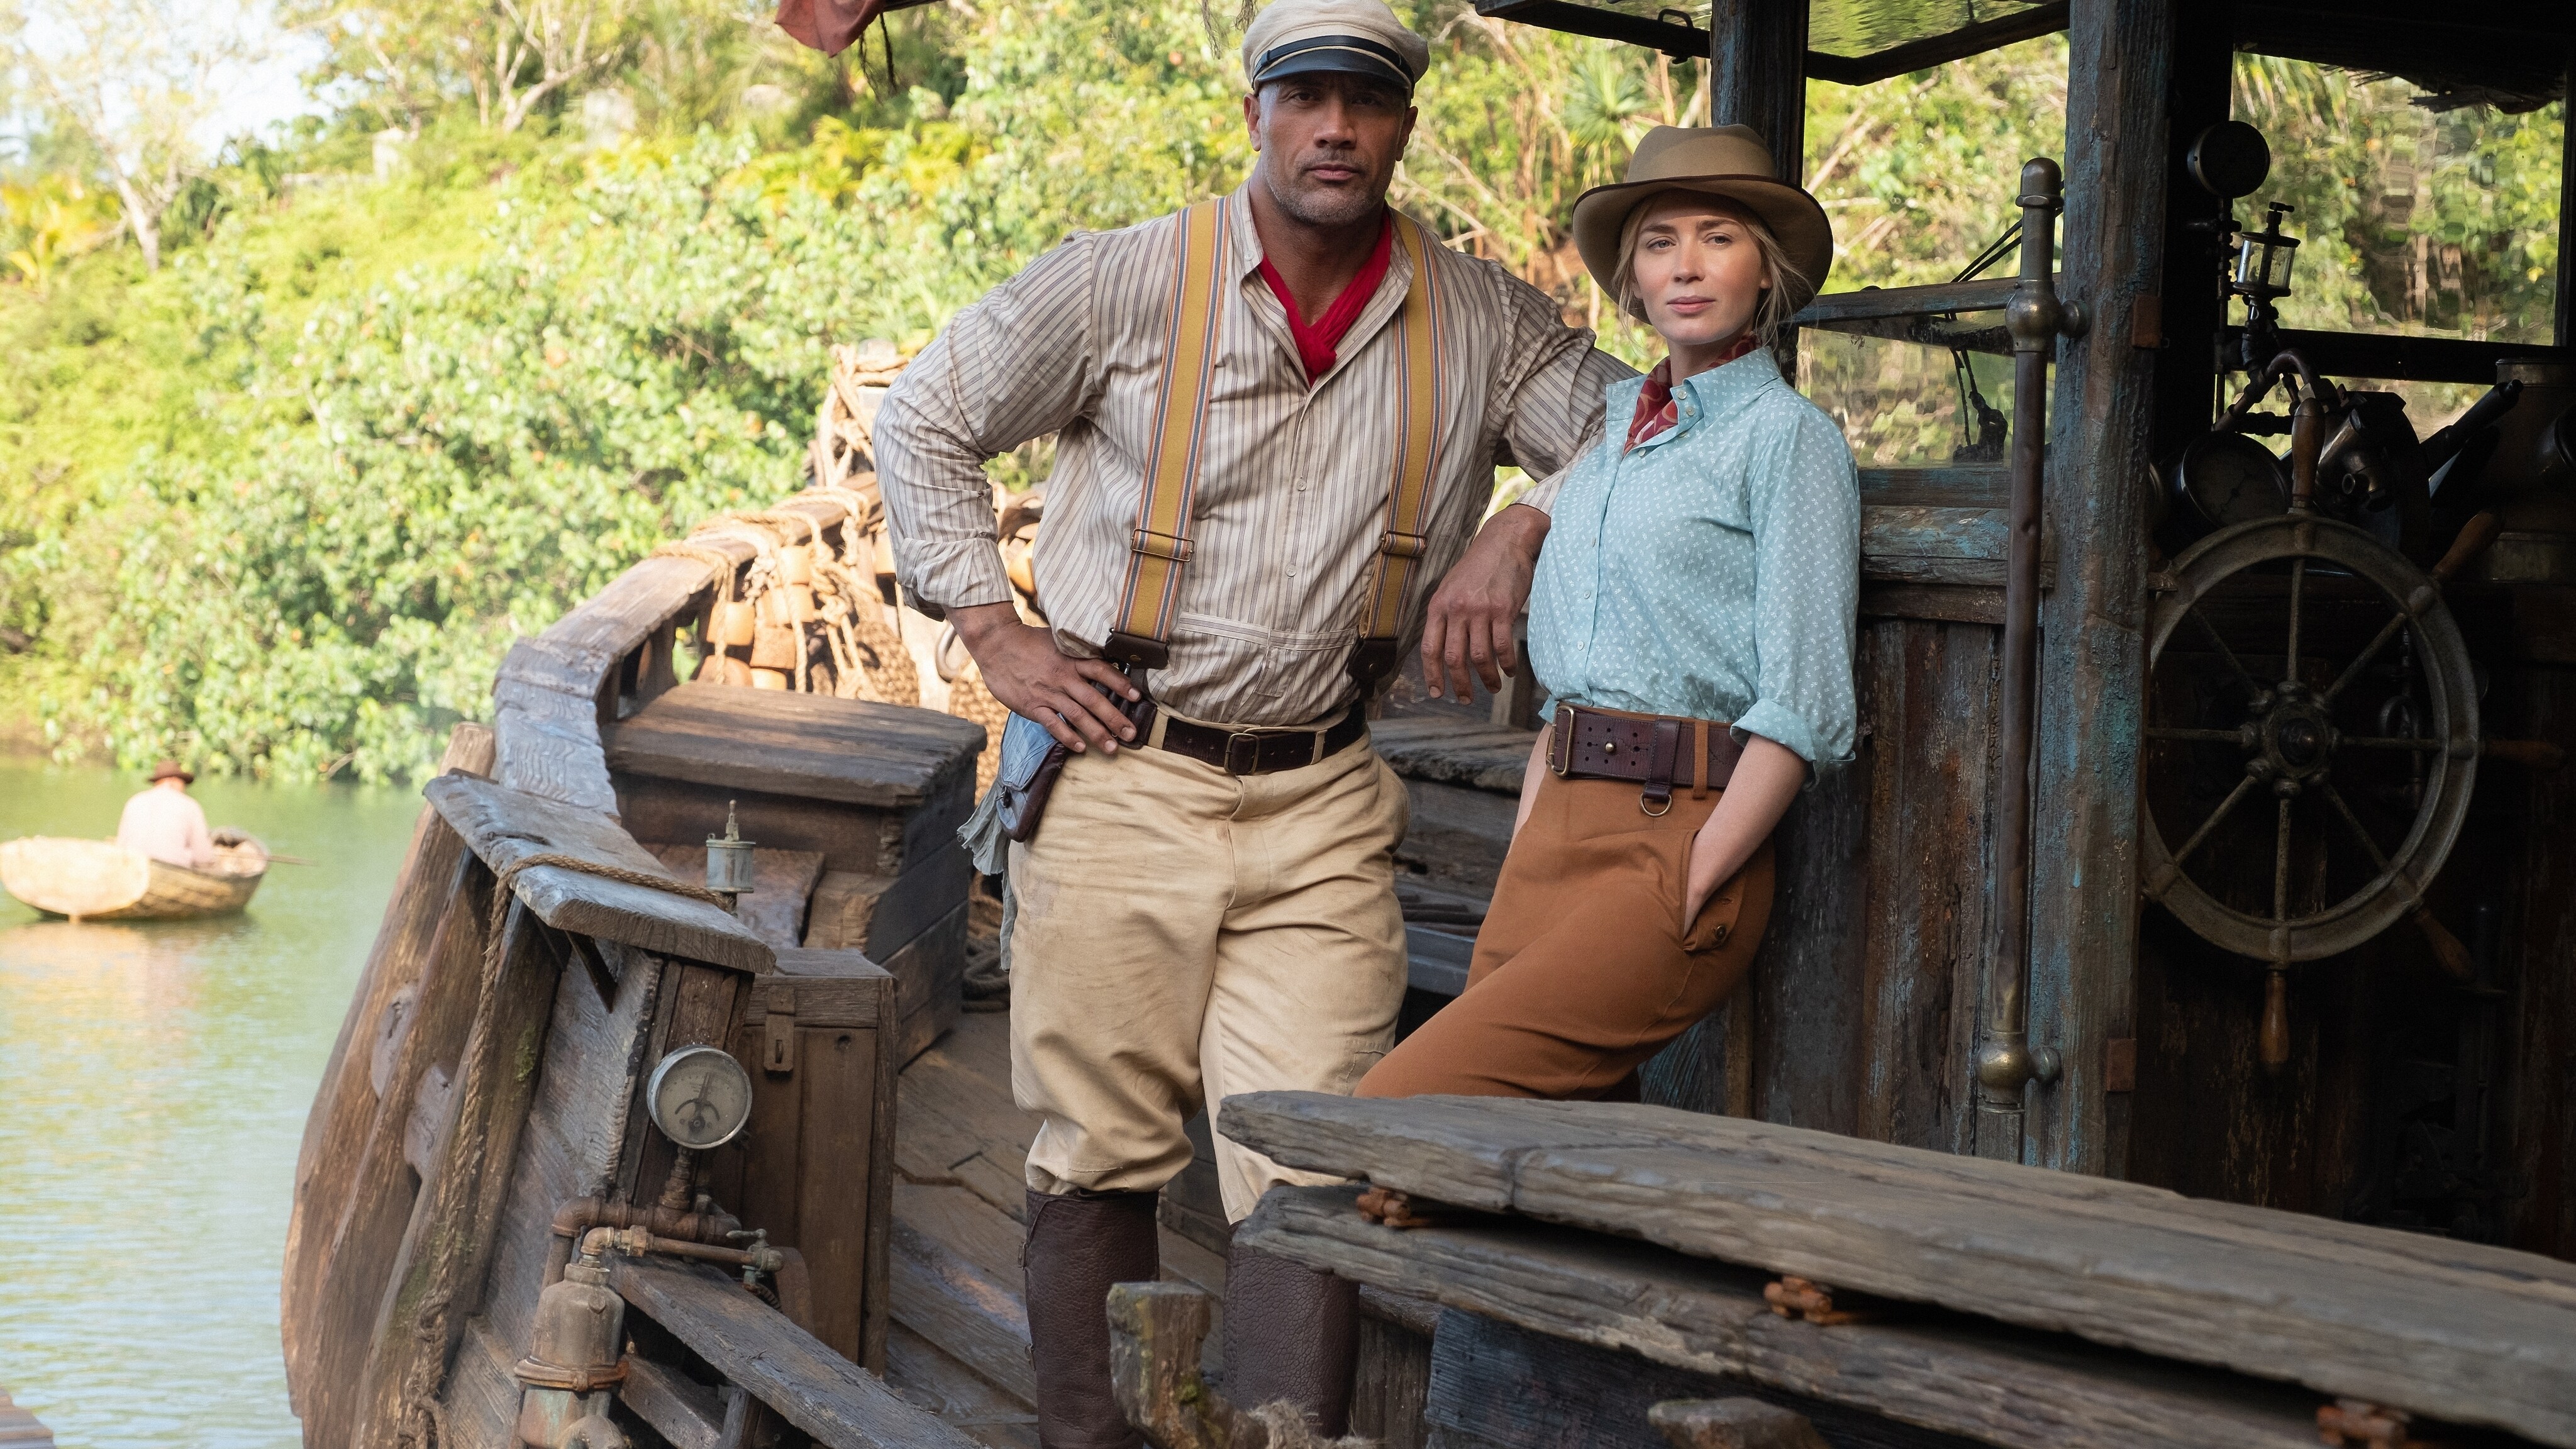 Disney’s “Jungle Cruise” Starring Dwayne Johnson And Emily Blunt To Debut In Theaters And On Disney+ With Premier Access July 30